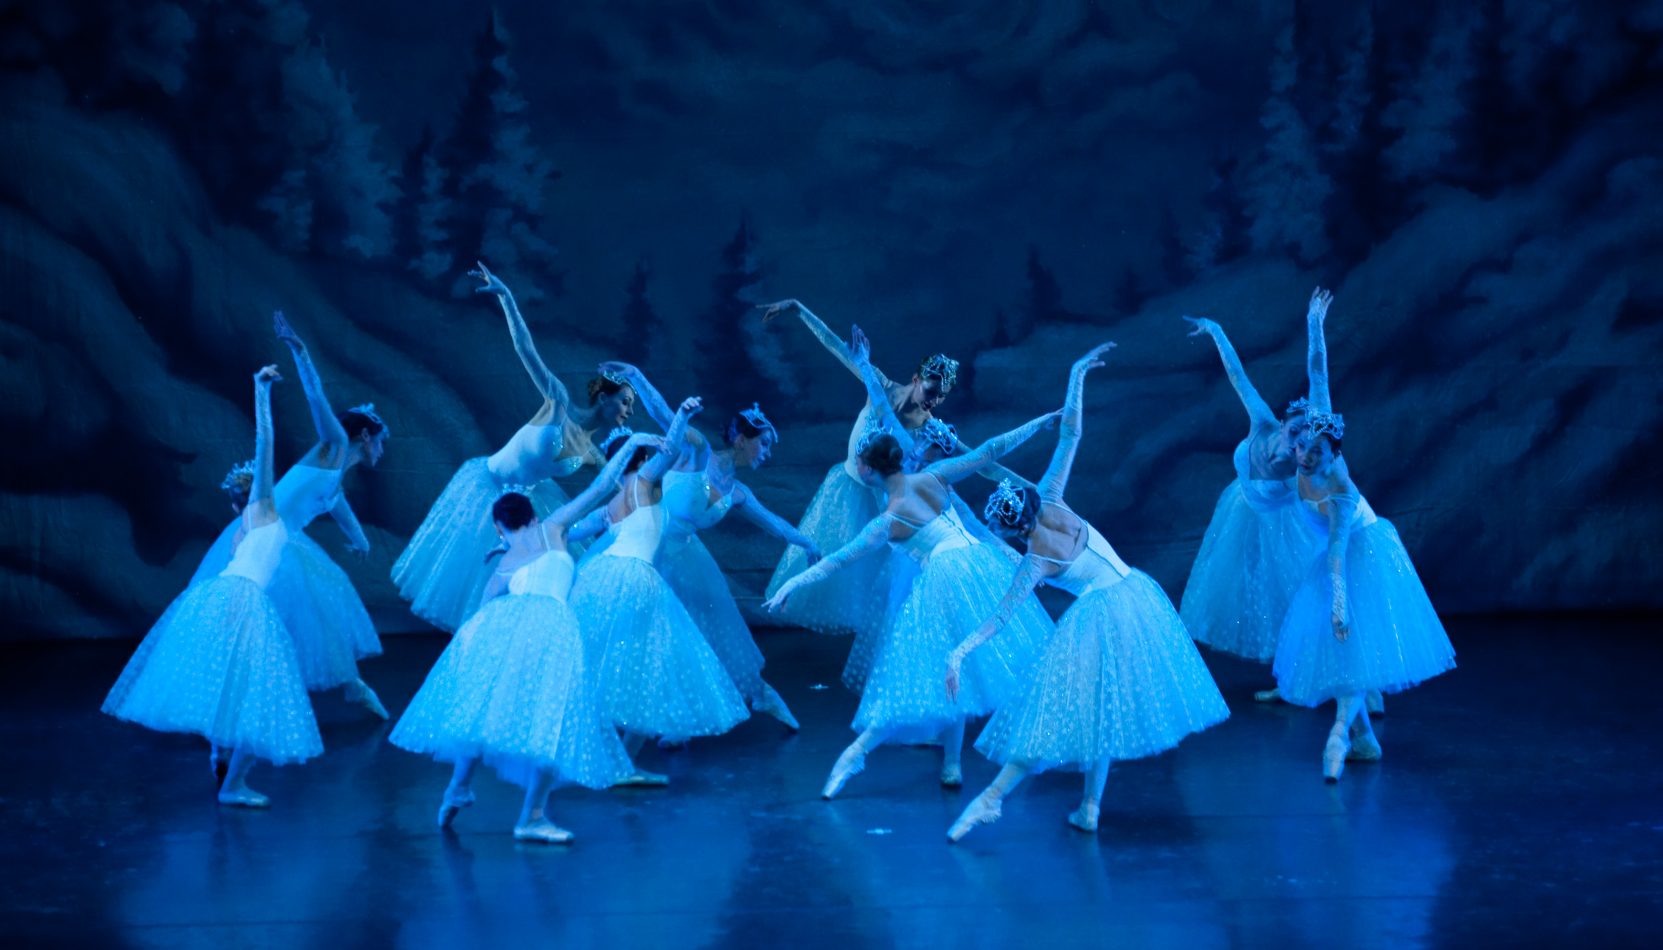 SPCB. Snowflakes, Nutcracker Act 1, G Liive, guildford, Surrey, ballet, December, Christmas, Whats On